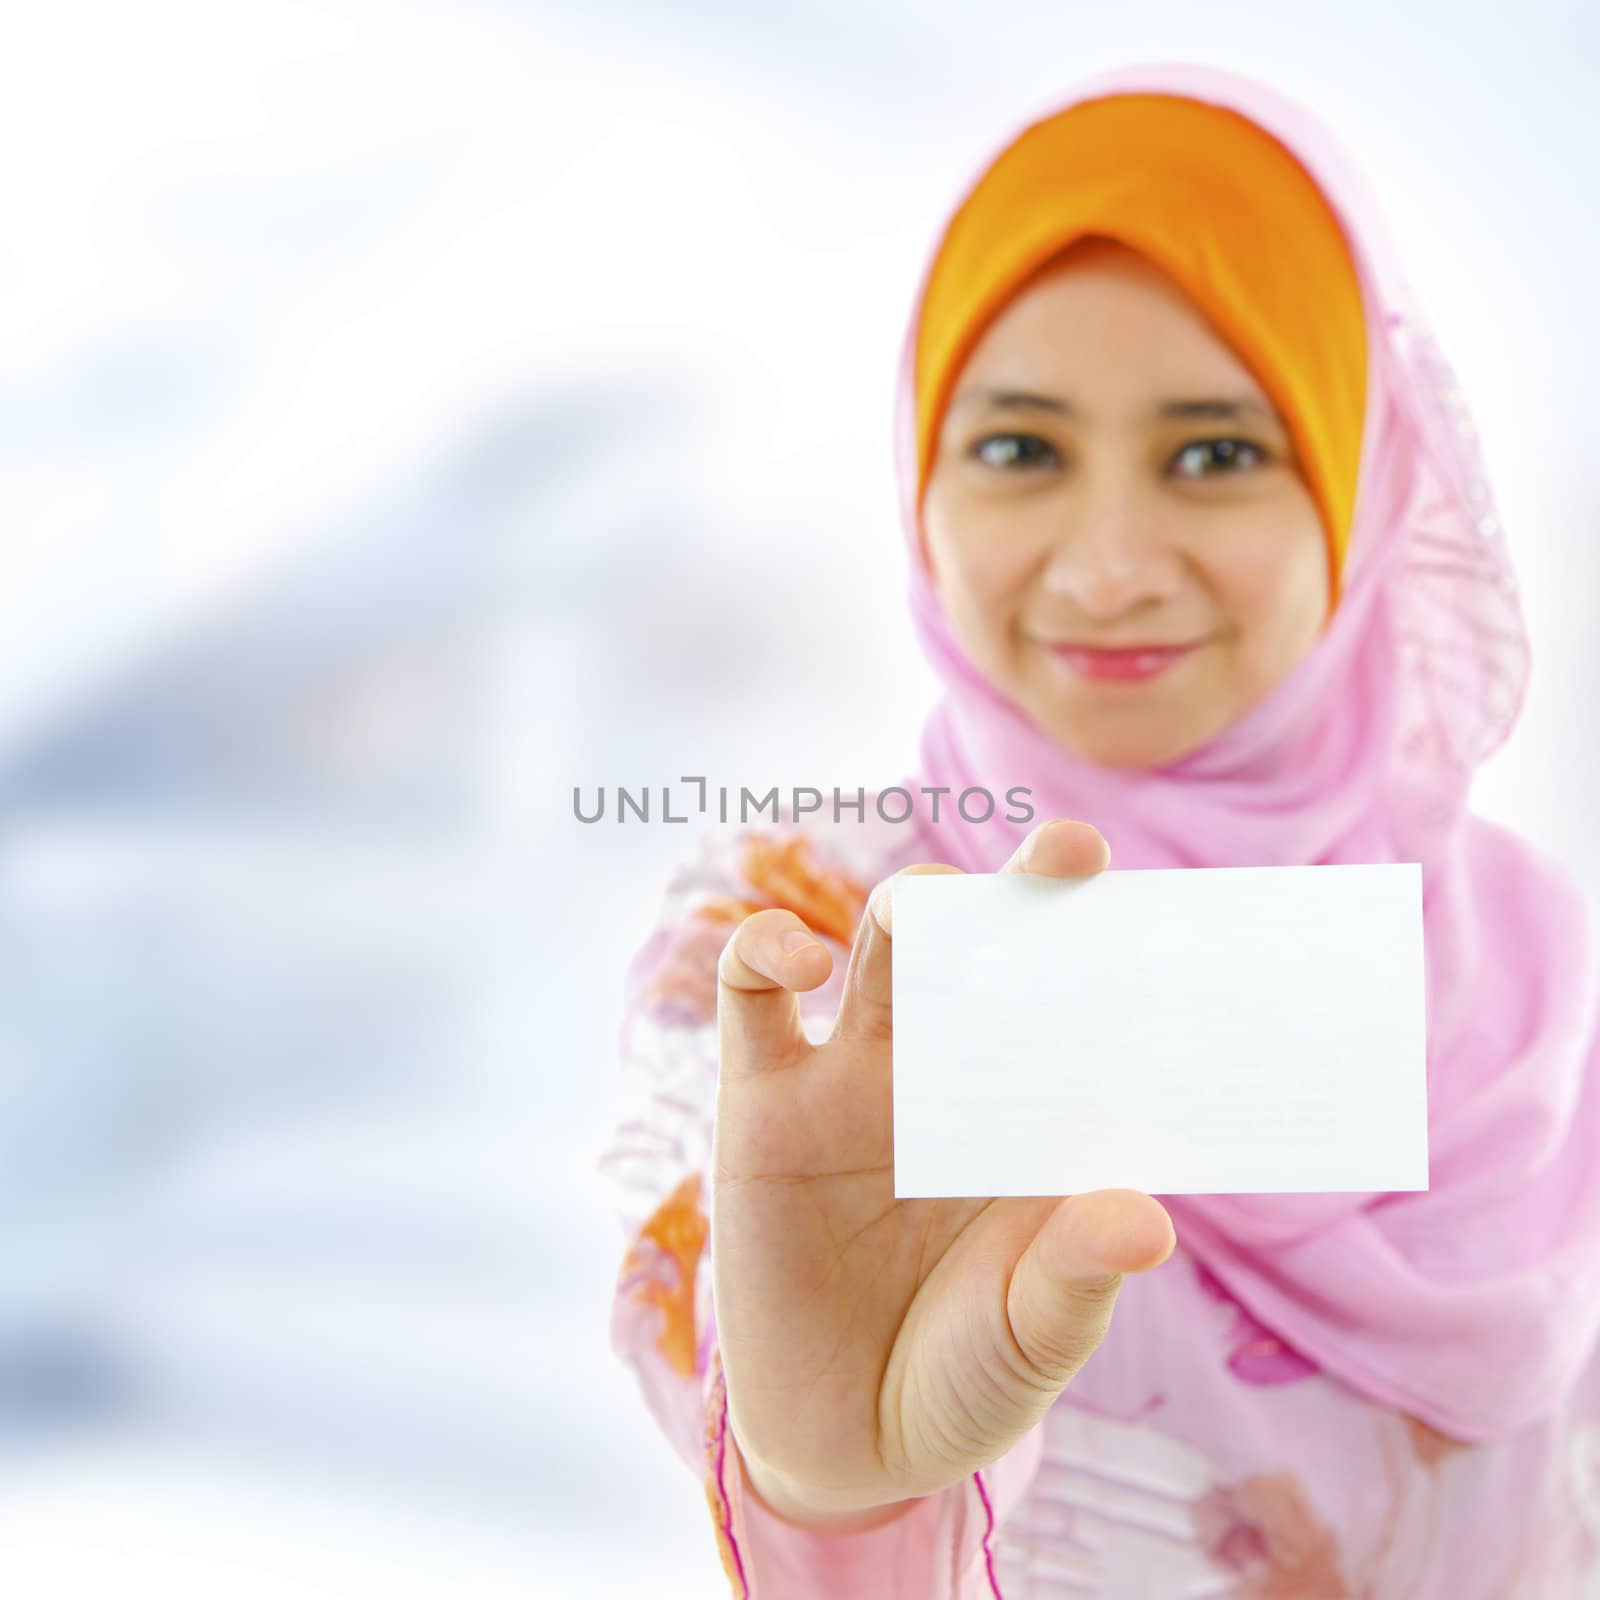 Muslim female holding business card, focus on hand